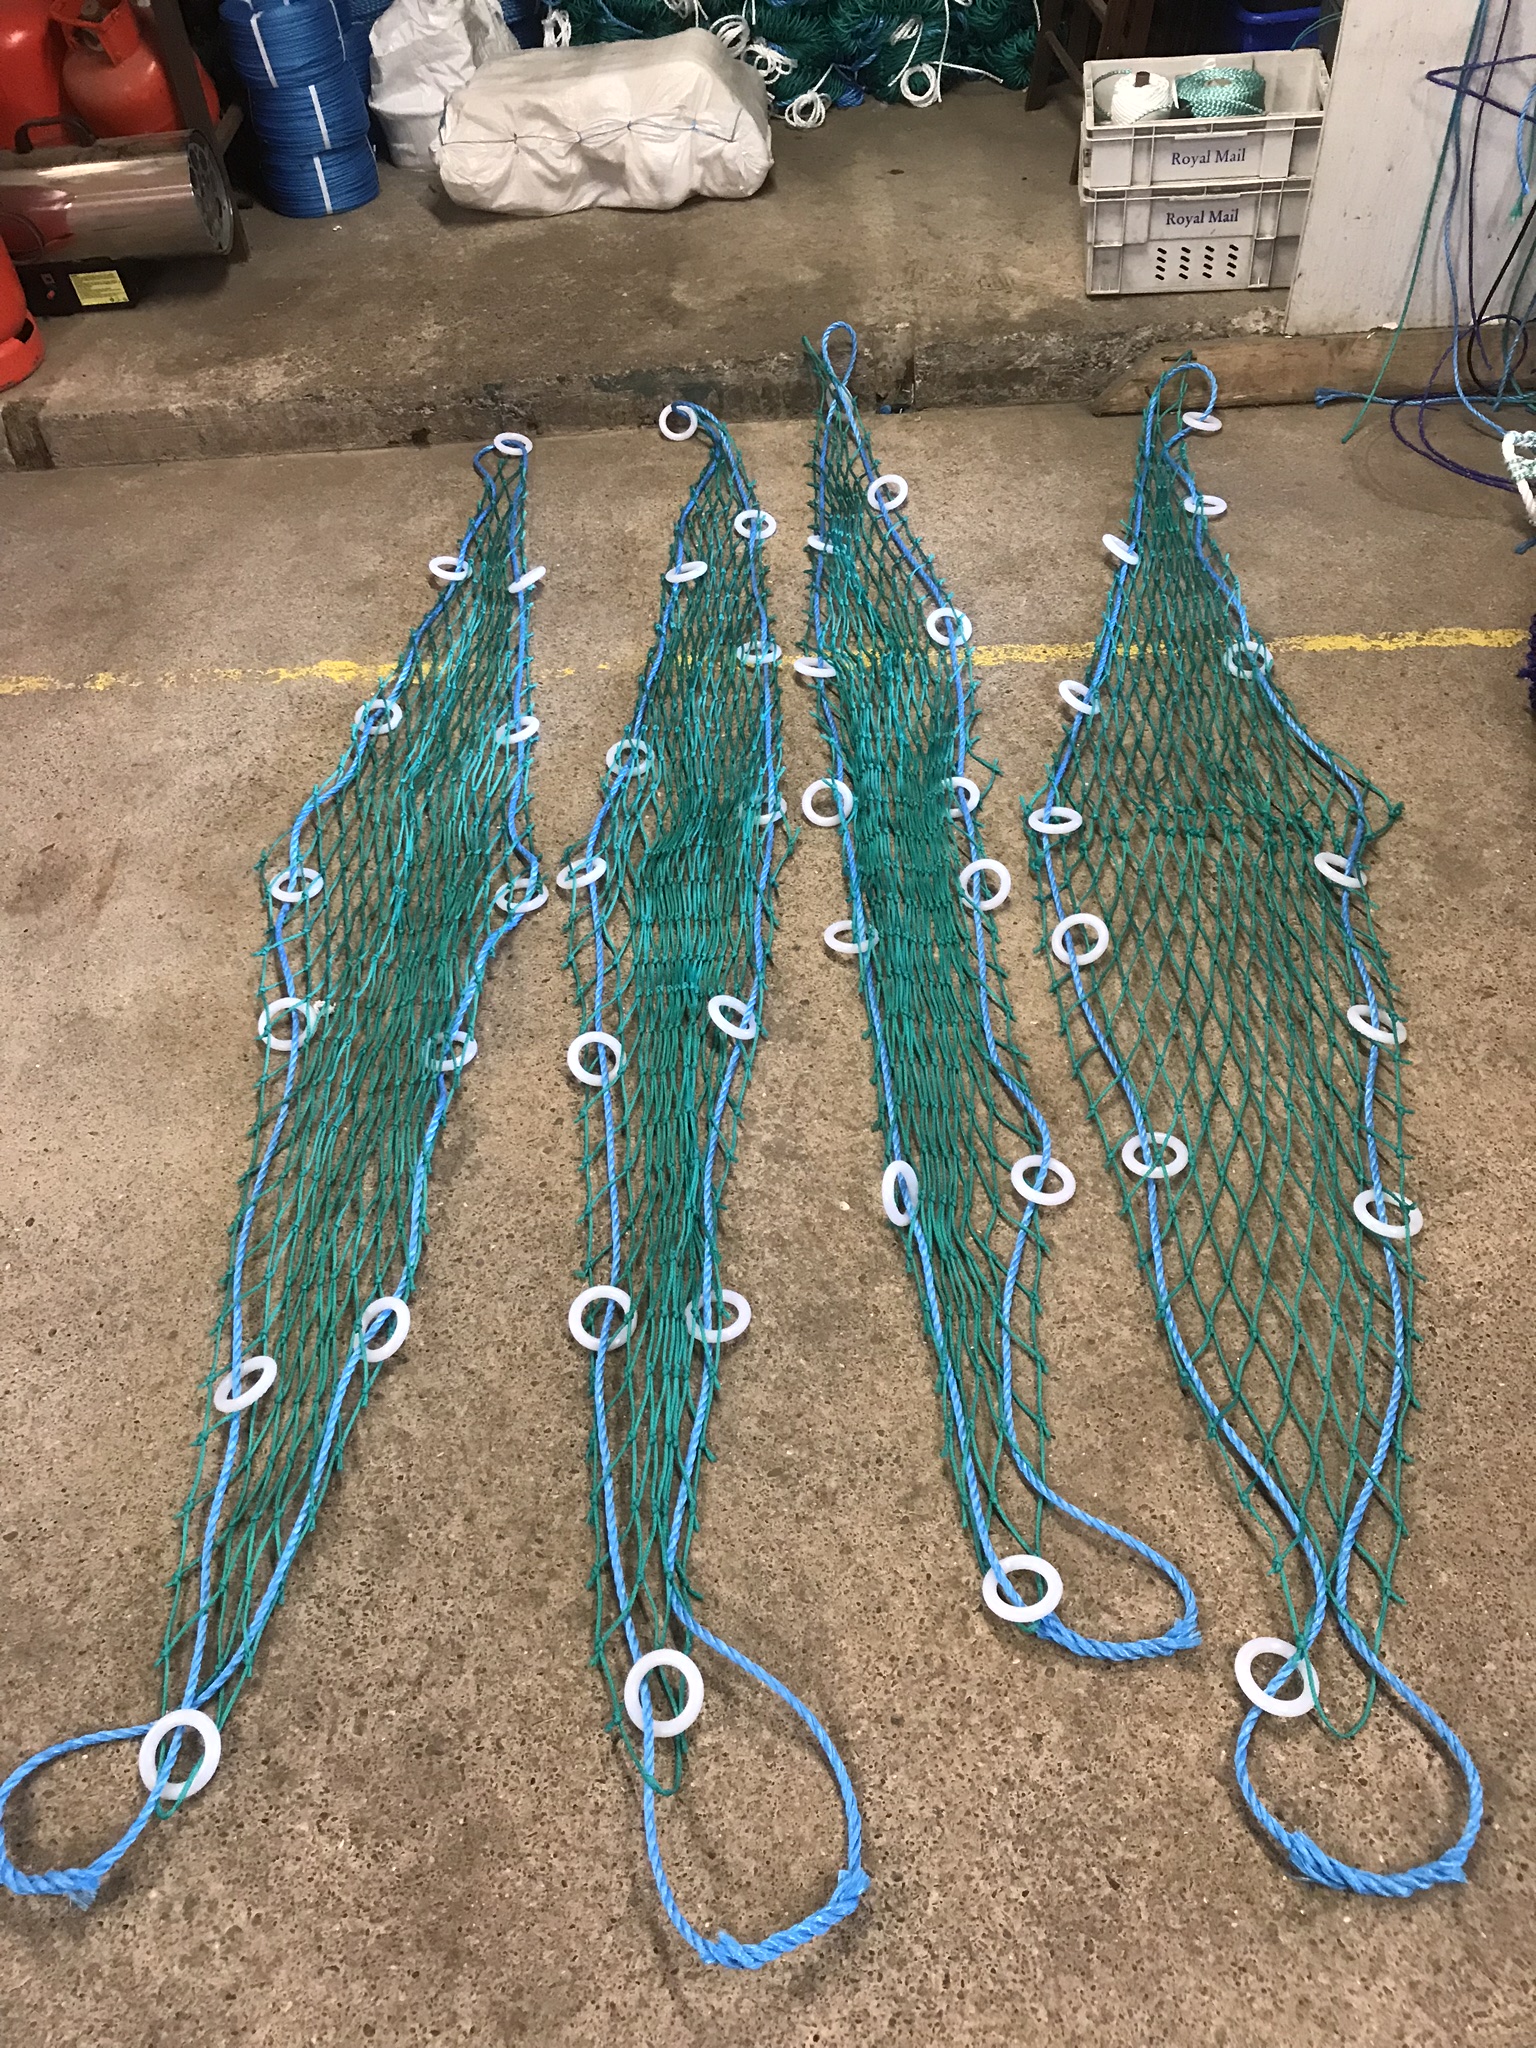 Specialised Rig Netting